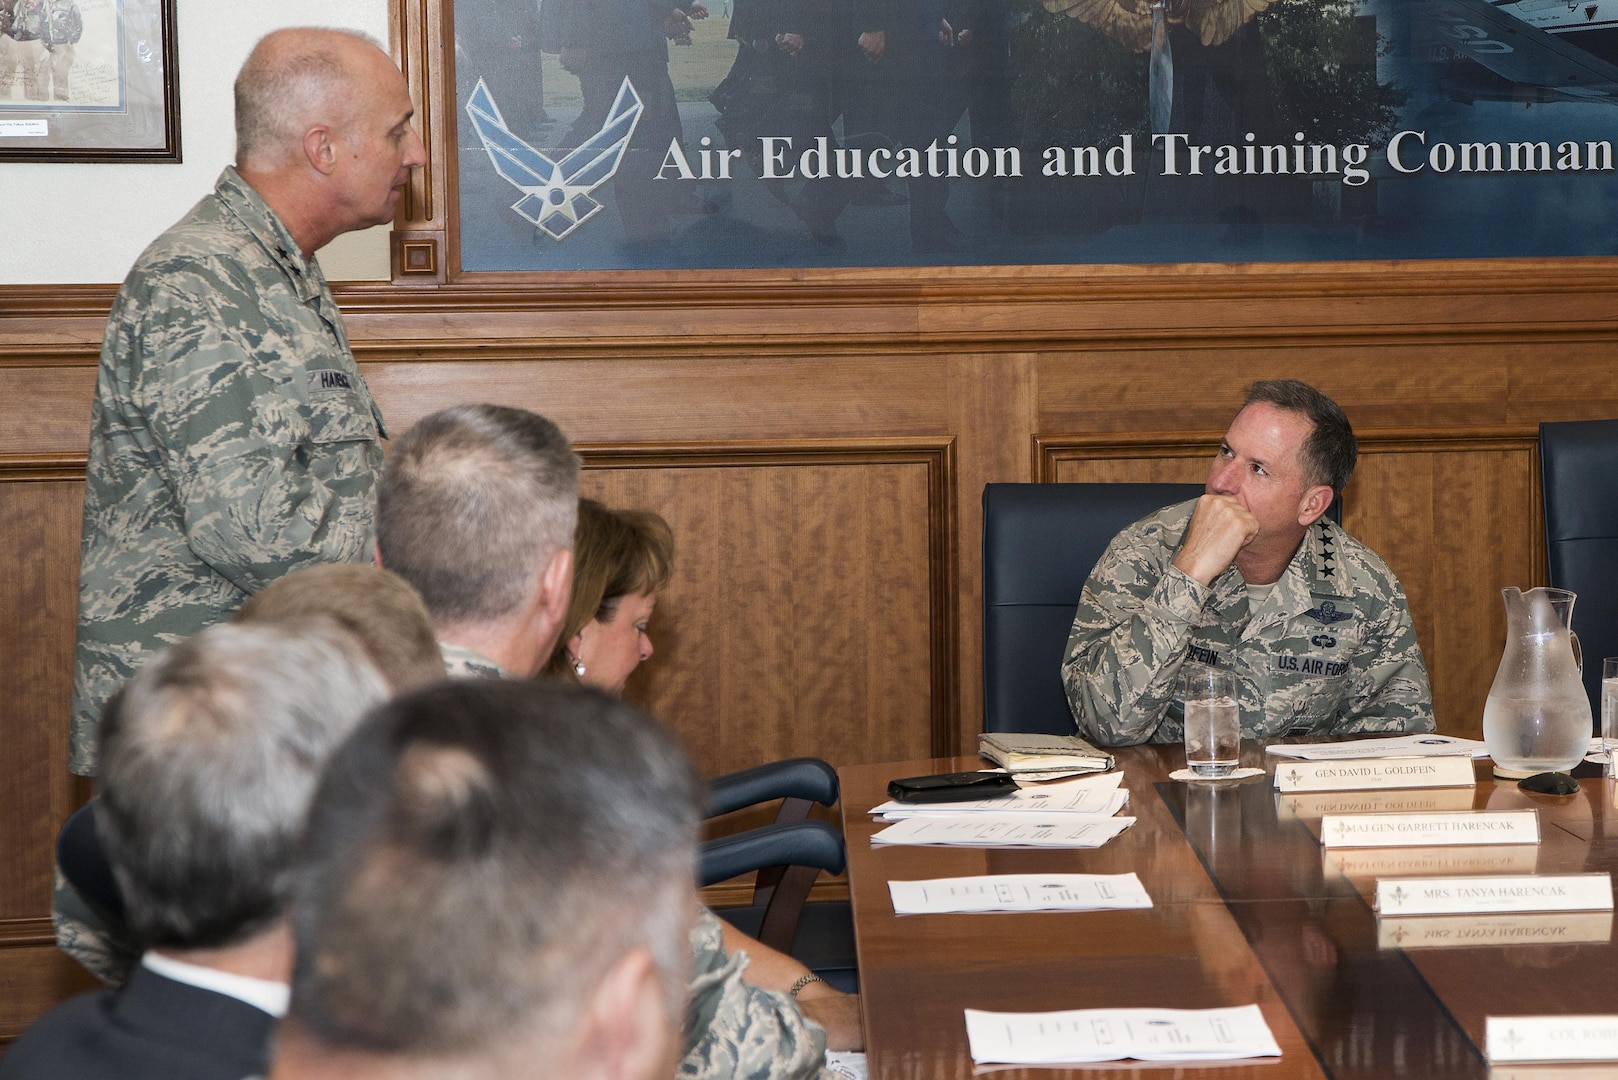 U.S. Air Force Maj. Gen. Garrett Harencak, Air Force Recruiting Service commander, discusses methods for recruitment with Air Force Chief of Staff Gen. David L. Goldfein during a roundtable meeting at Joint Base San Antonio-Randolph Aug. 23, 2016. The purpose of the meeting was to provide insights and challenges faced for recruiters in specialty careers such as medical, engineering and special operations.